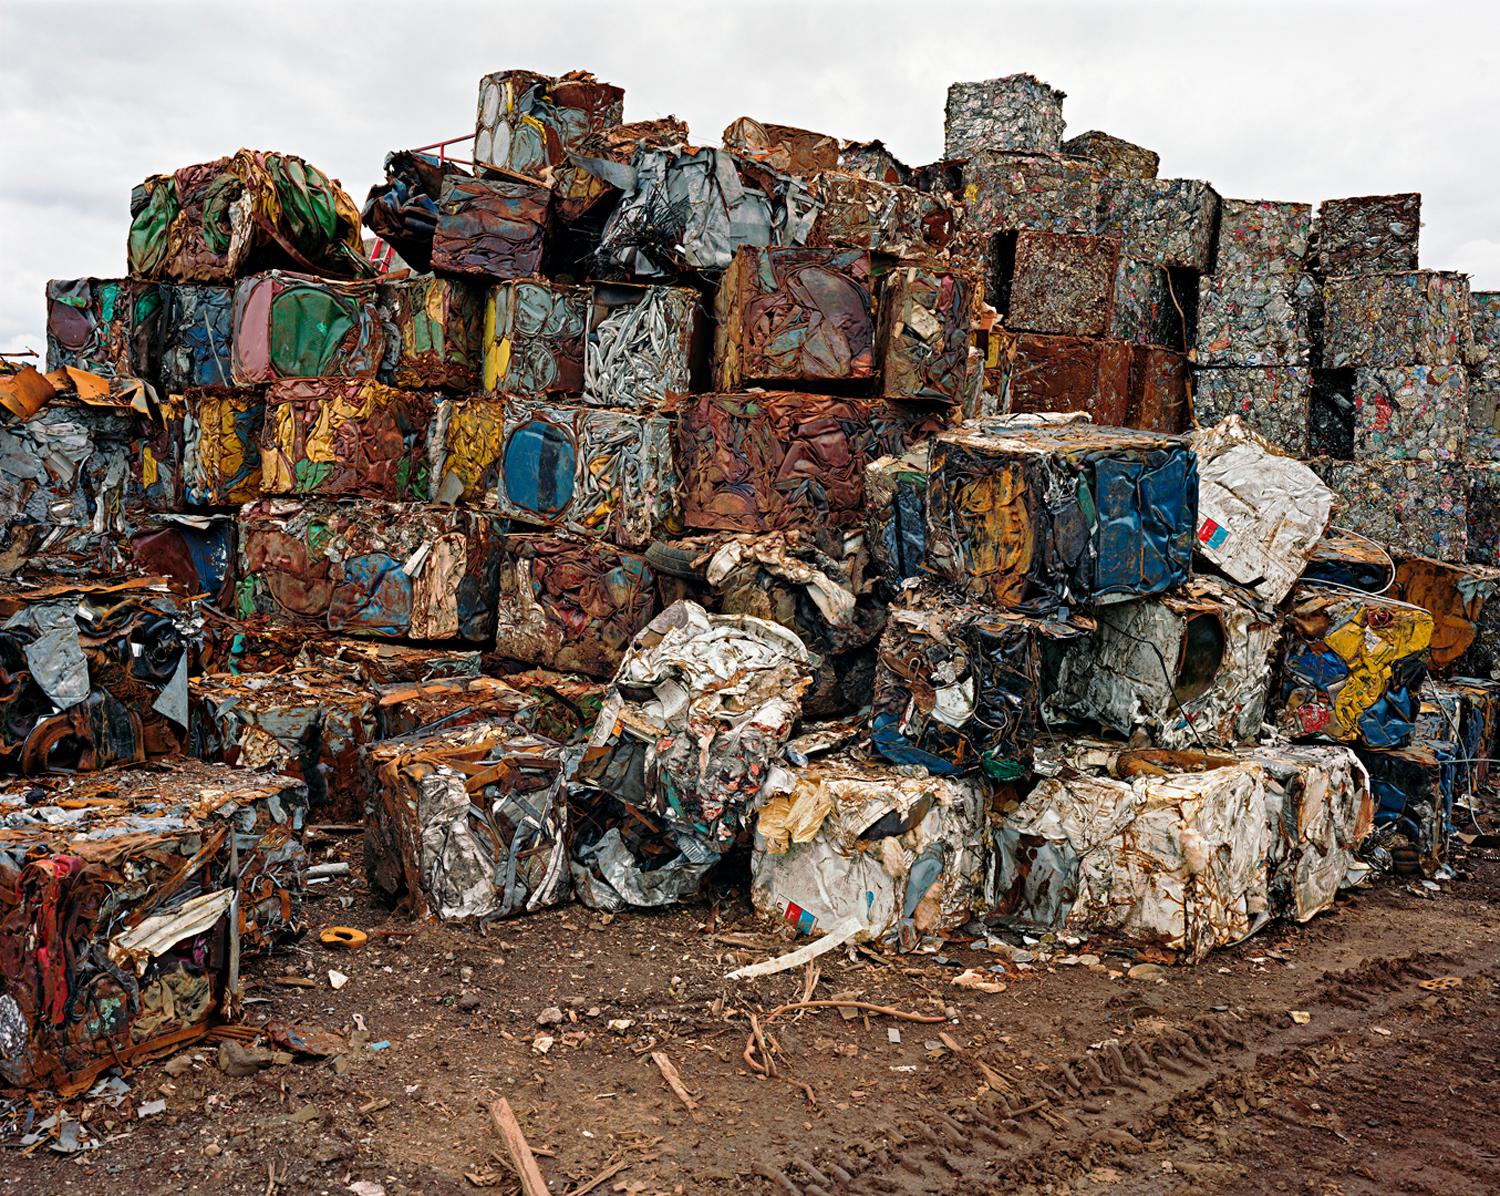 Photograph by Edward Burtynsky. A pile of densified cans.